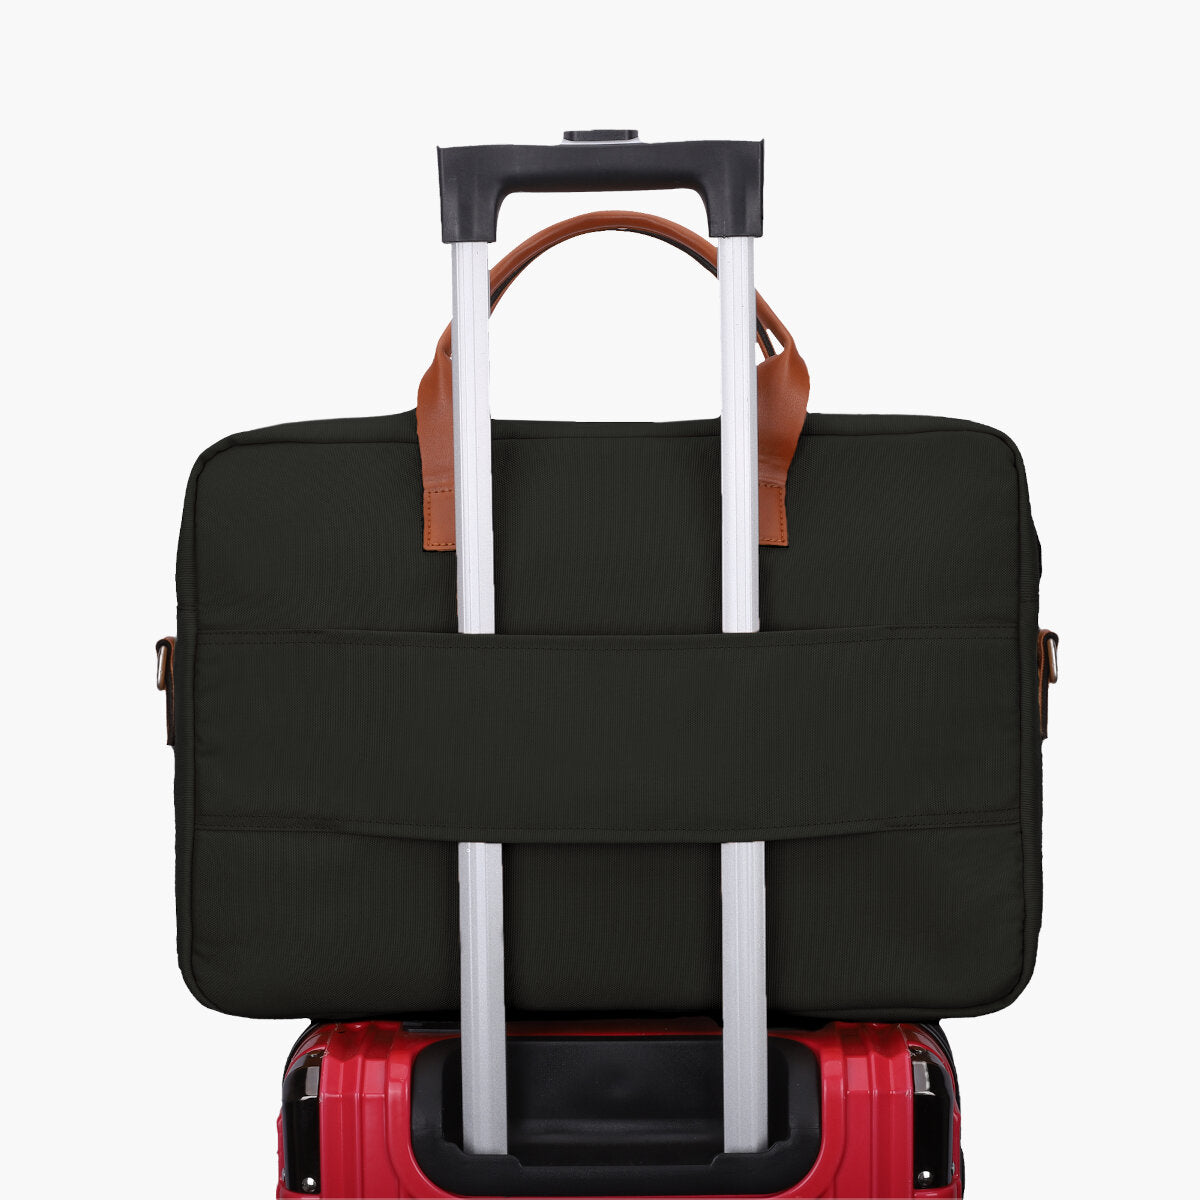 Olive | Protecta The Strong Buzz Office Laptop Bag - 8